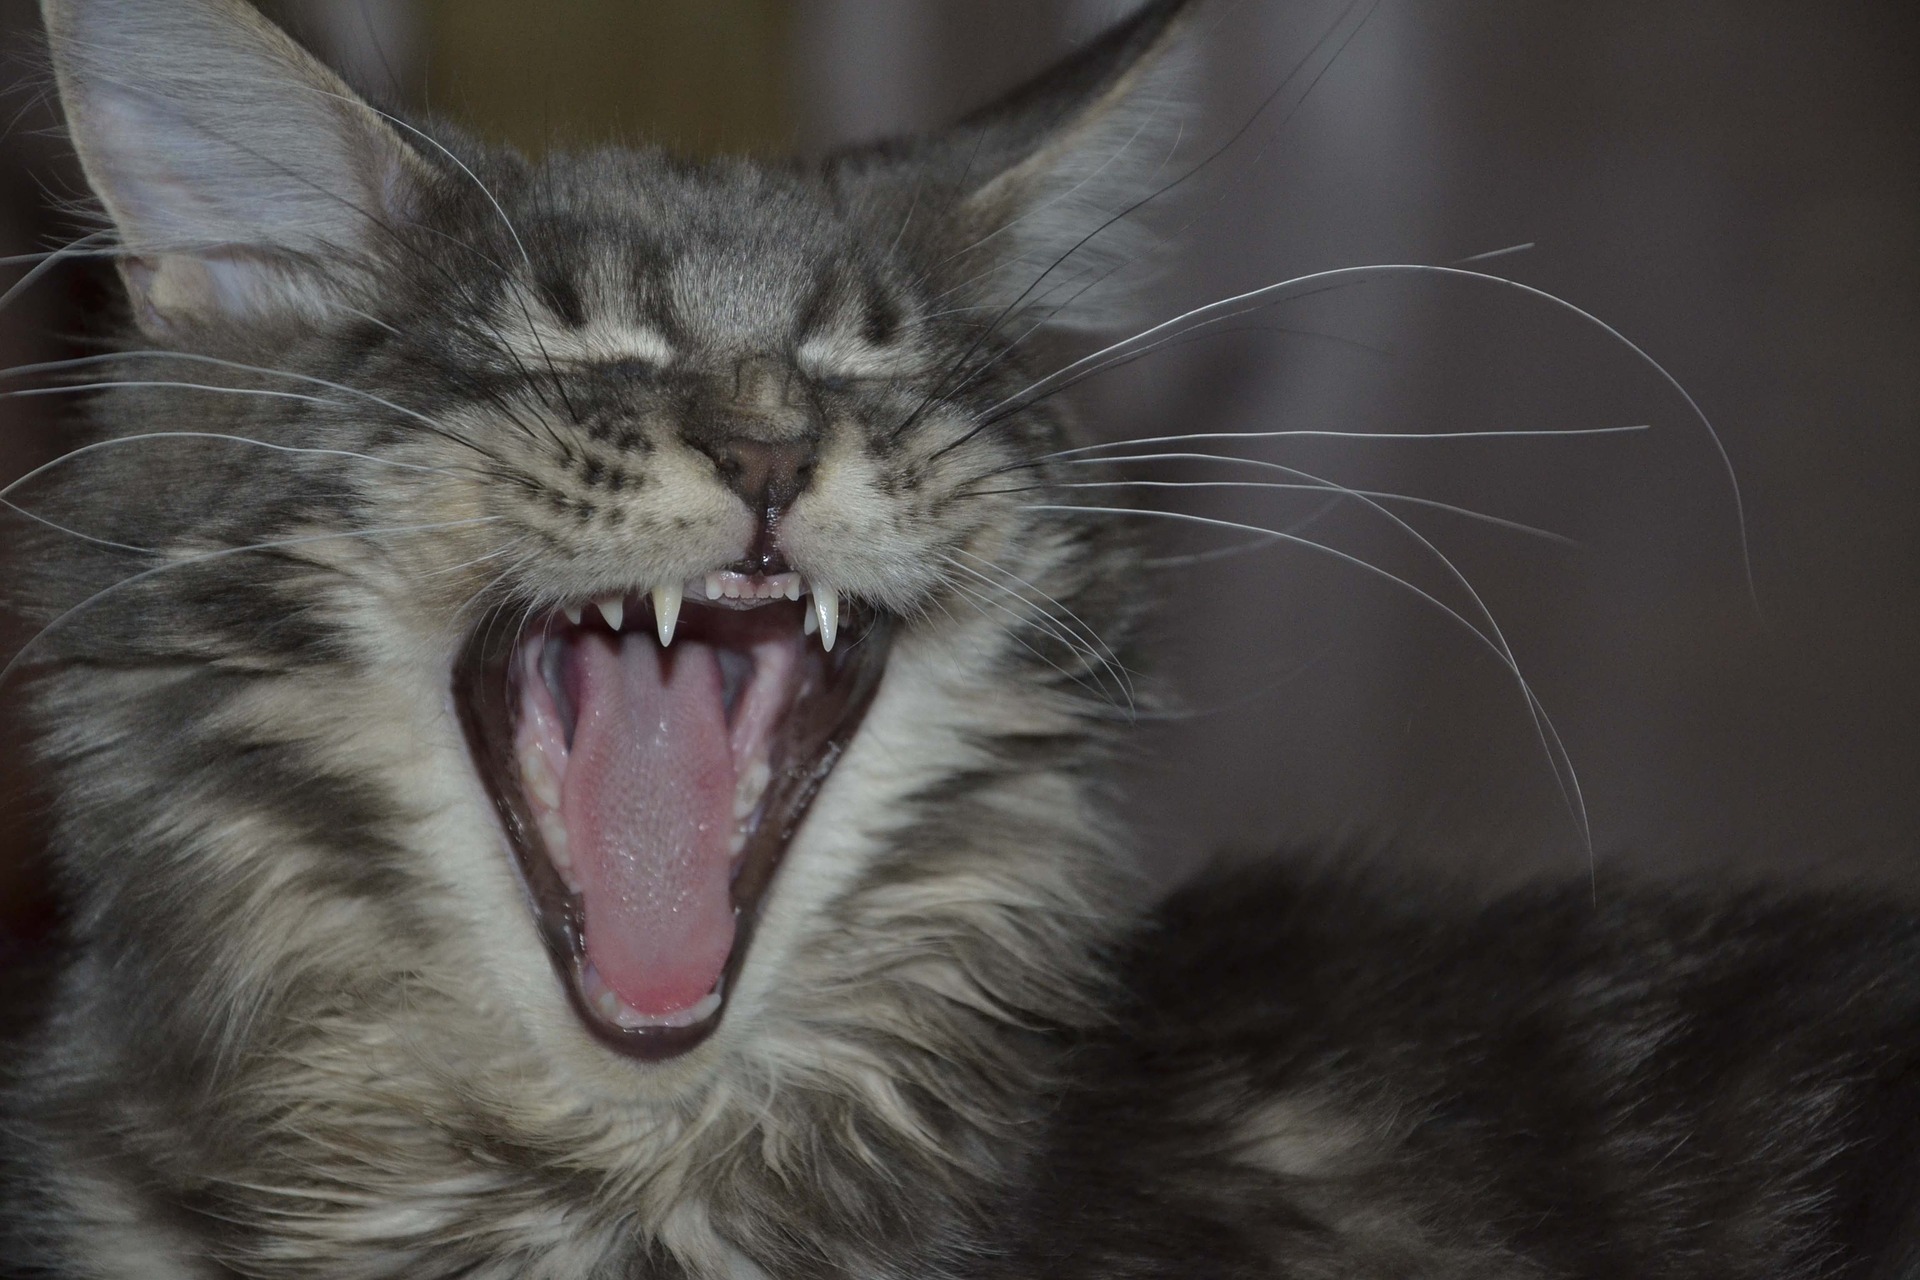 Maine coon cat yawning.